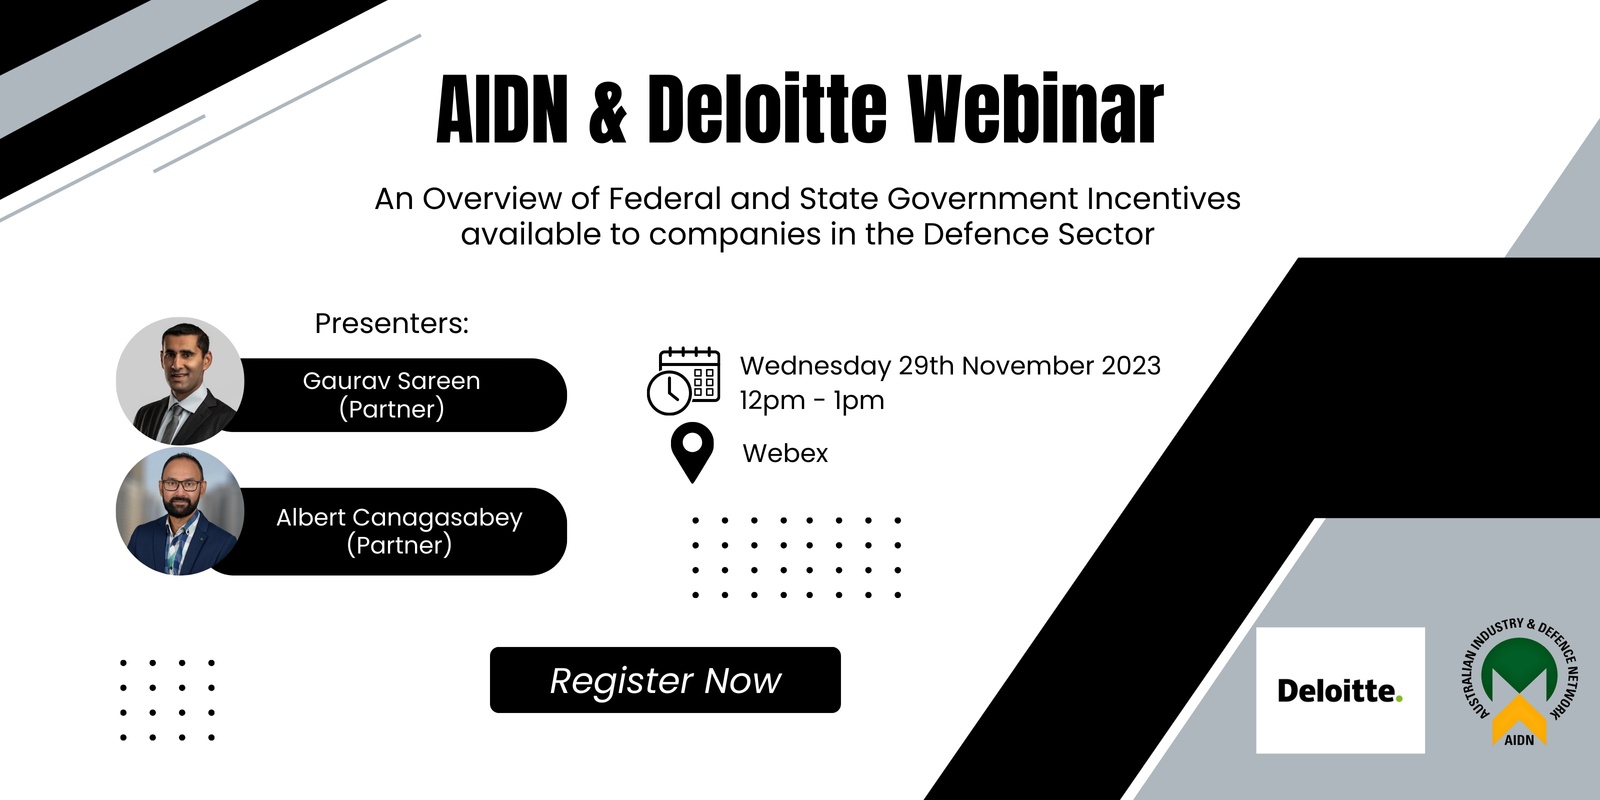 Banner image for AIDN & Deloitte Webinar - An Overview of Federal and State Government Incentives available to companies in the Defence Sector